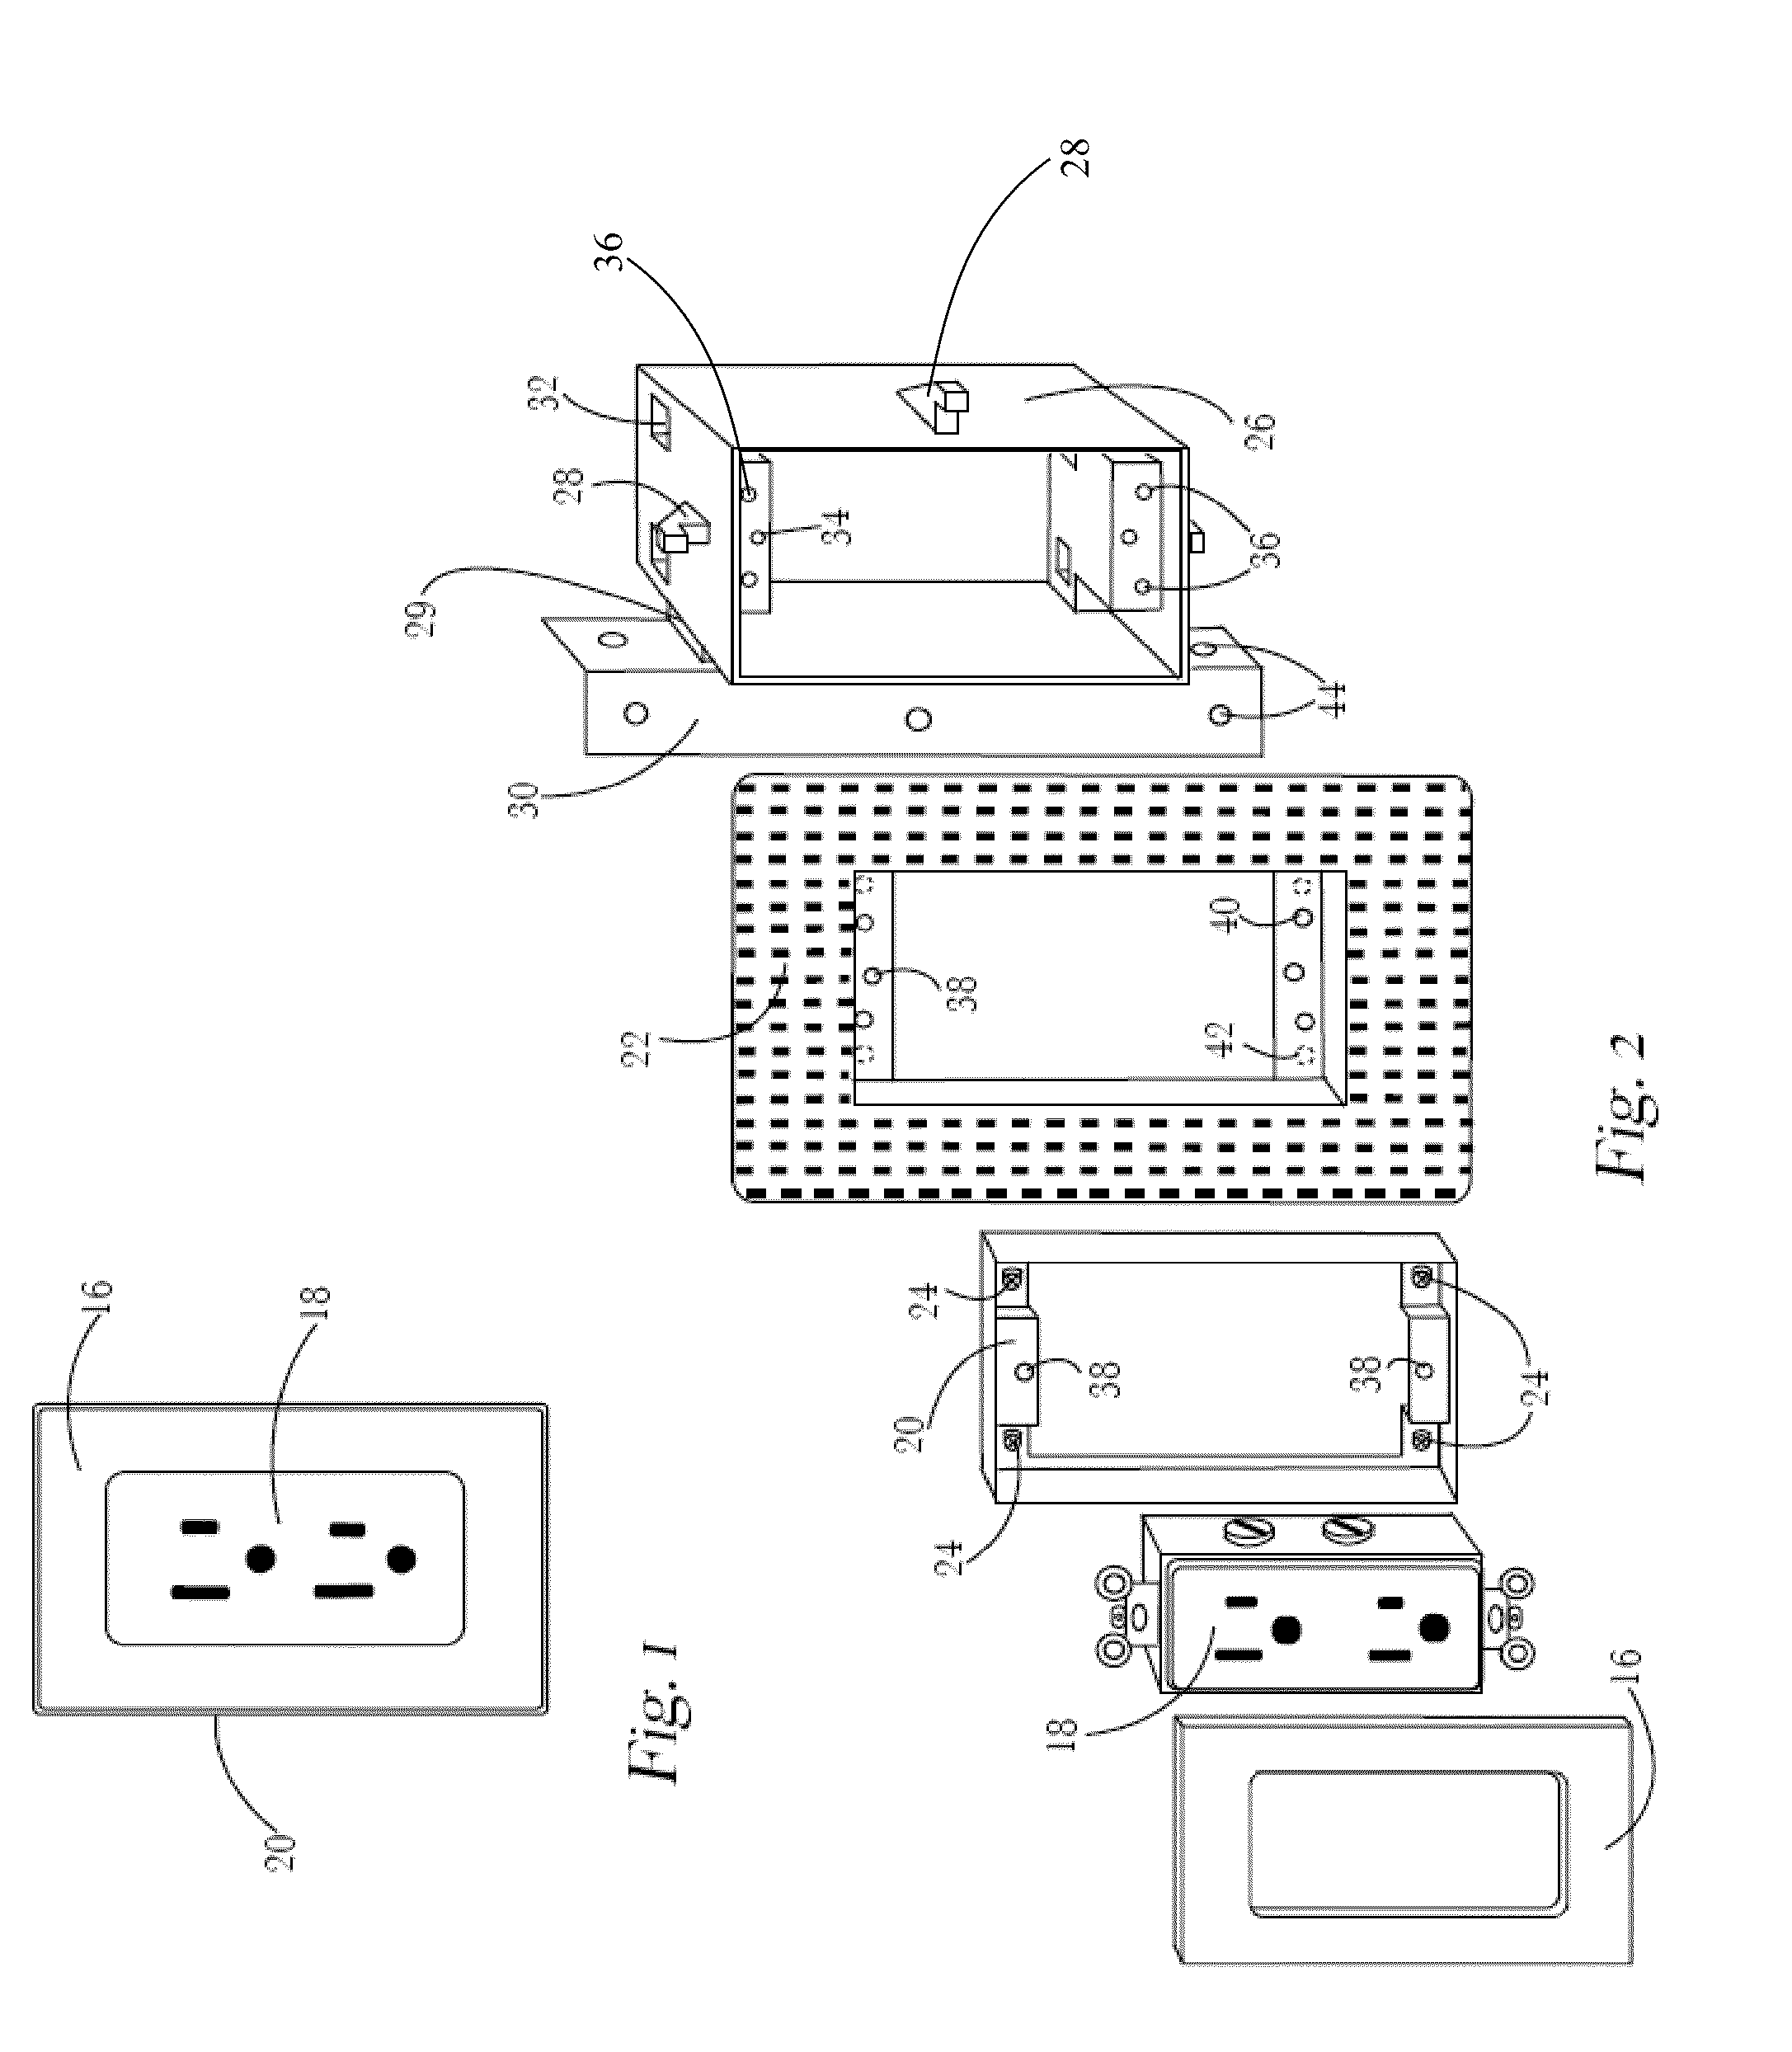 Adjustable wall enclosure for electrical devices and the like